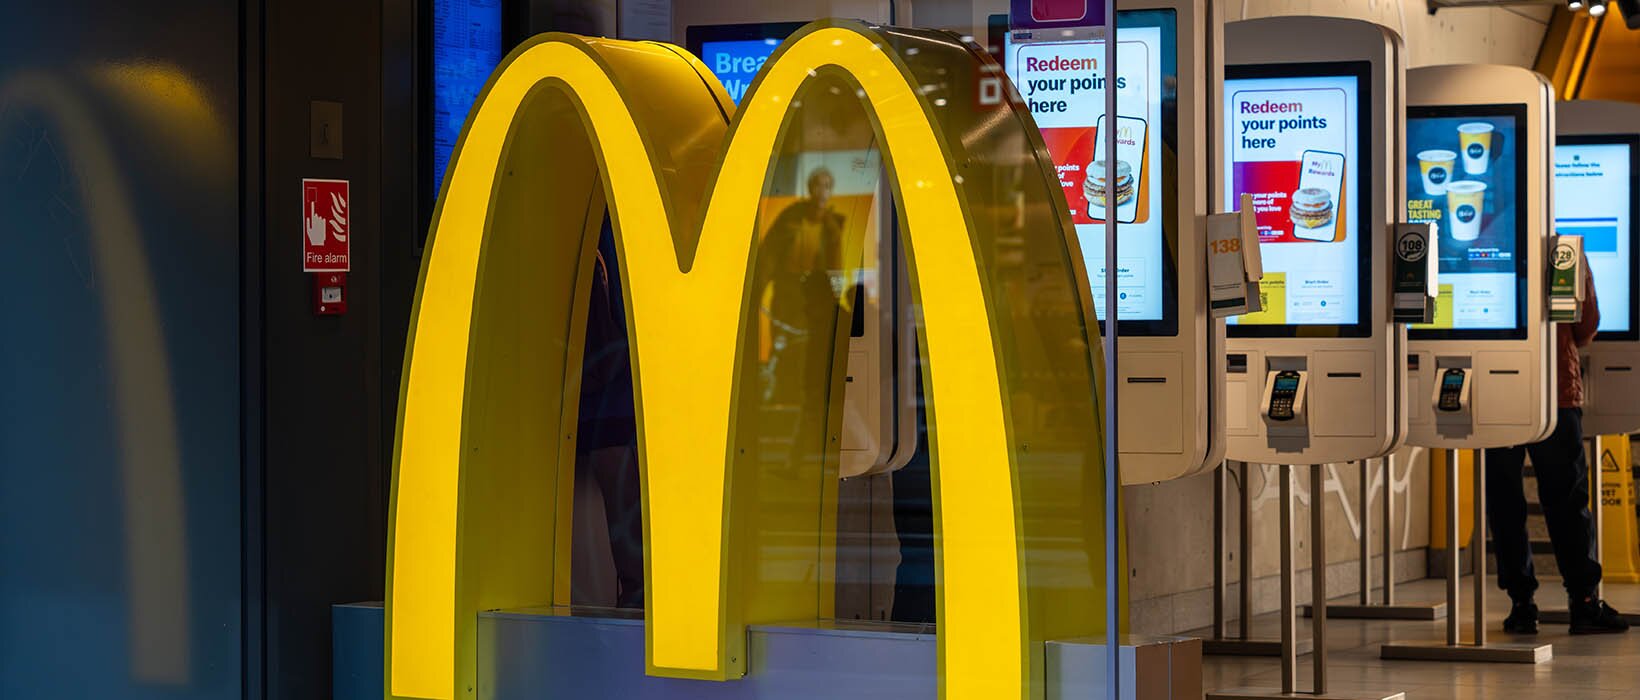 McDonald's denies UK system shutdown was a cybersecurity attack